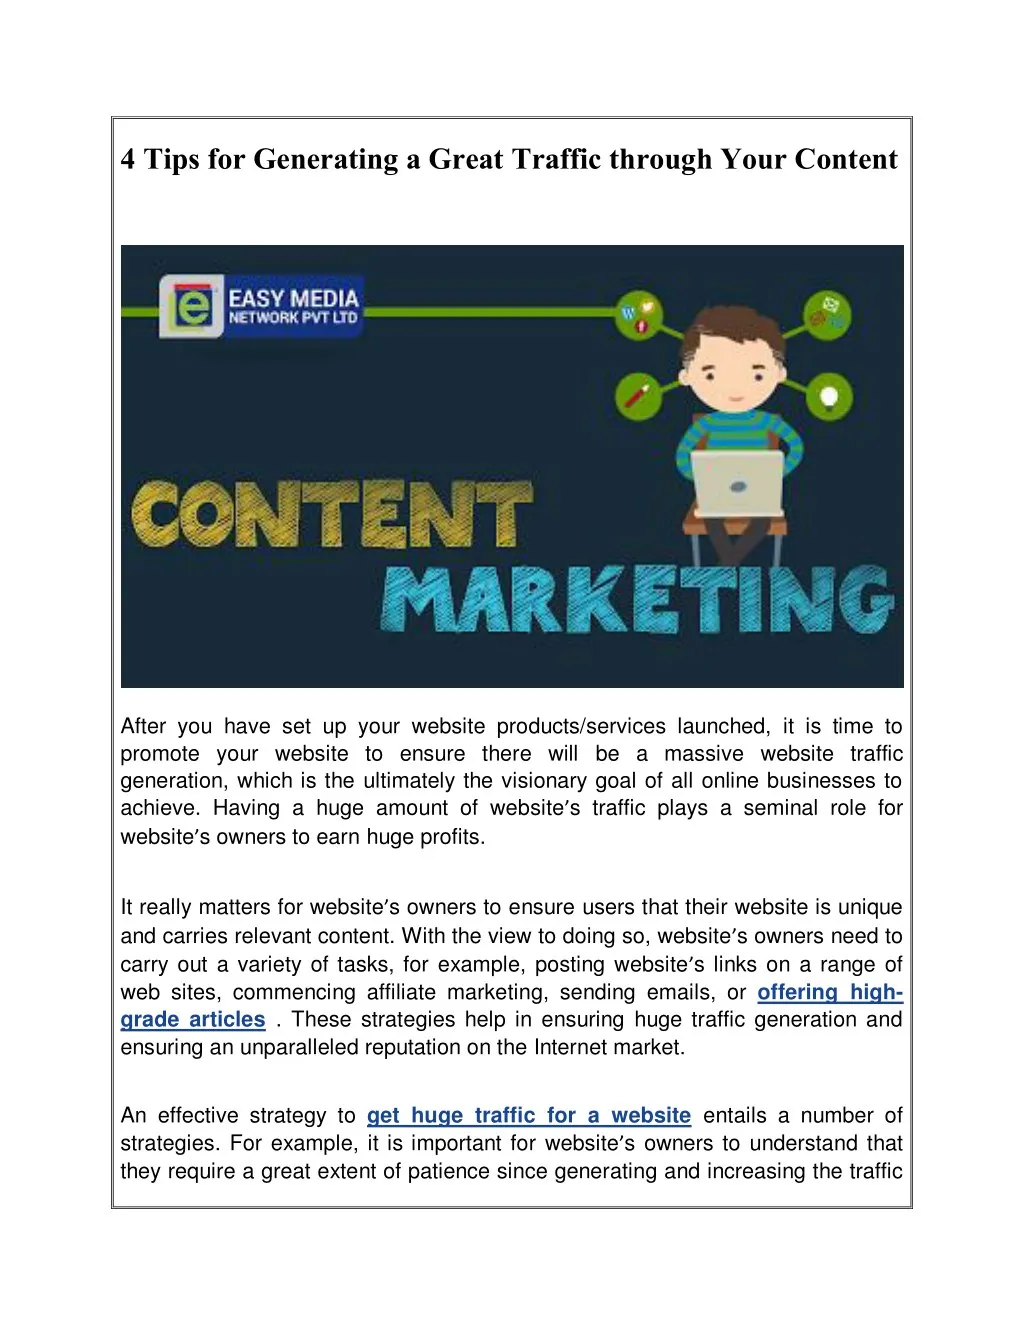 4 tips for generating a great traffic through